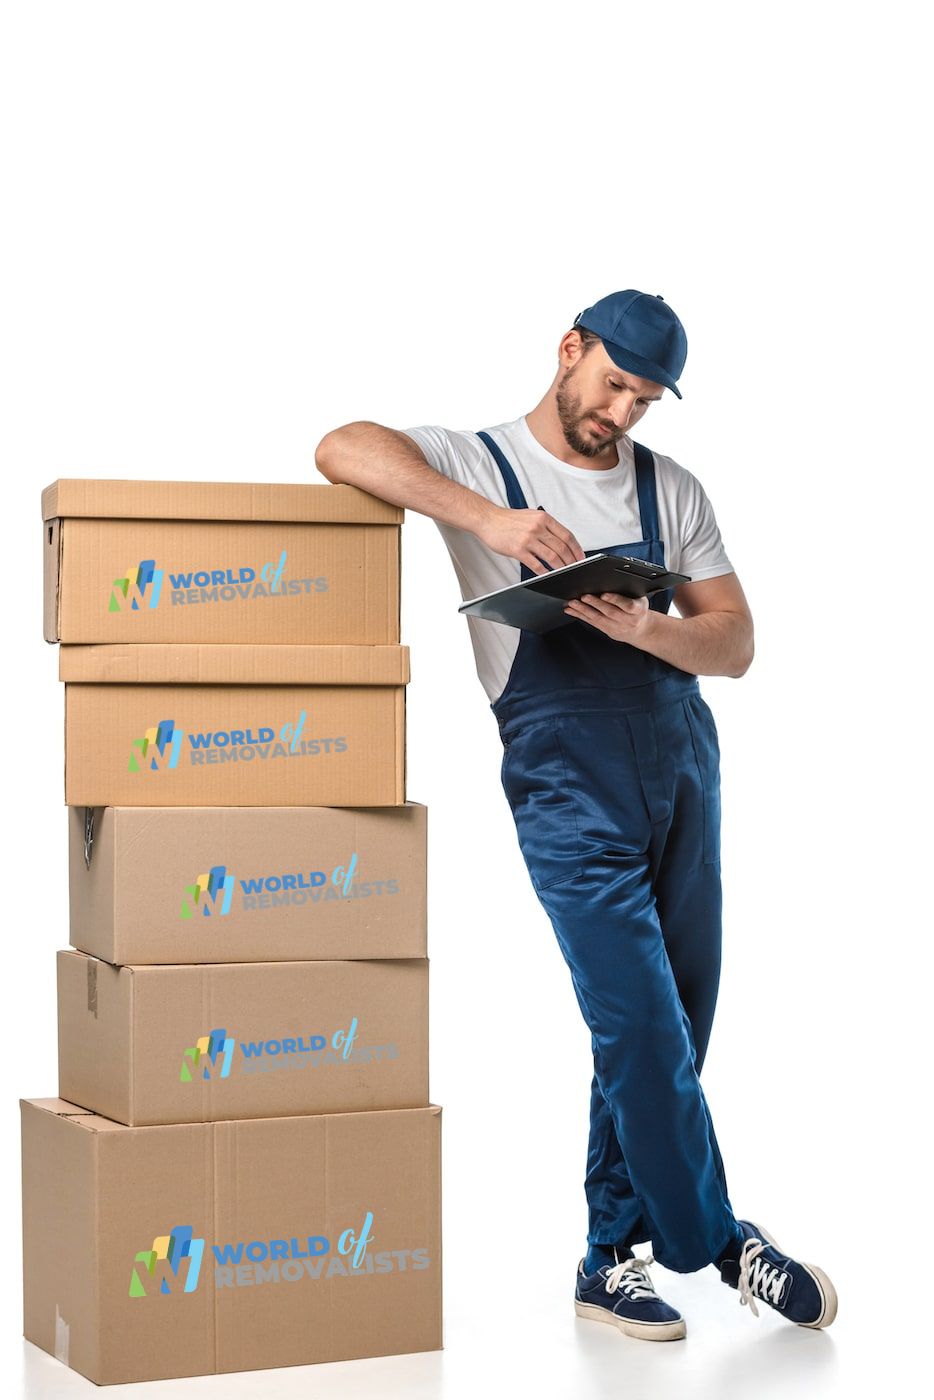 world of removalist boxes Sydney removalists